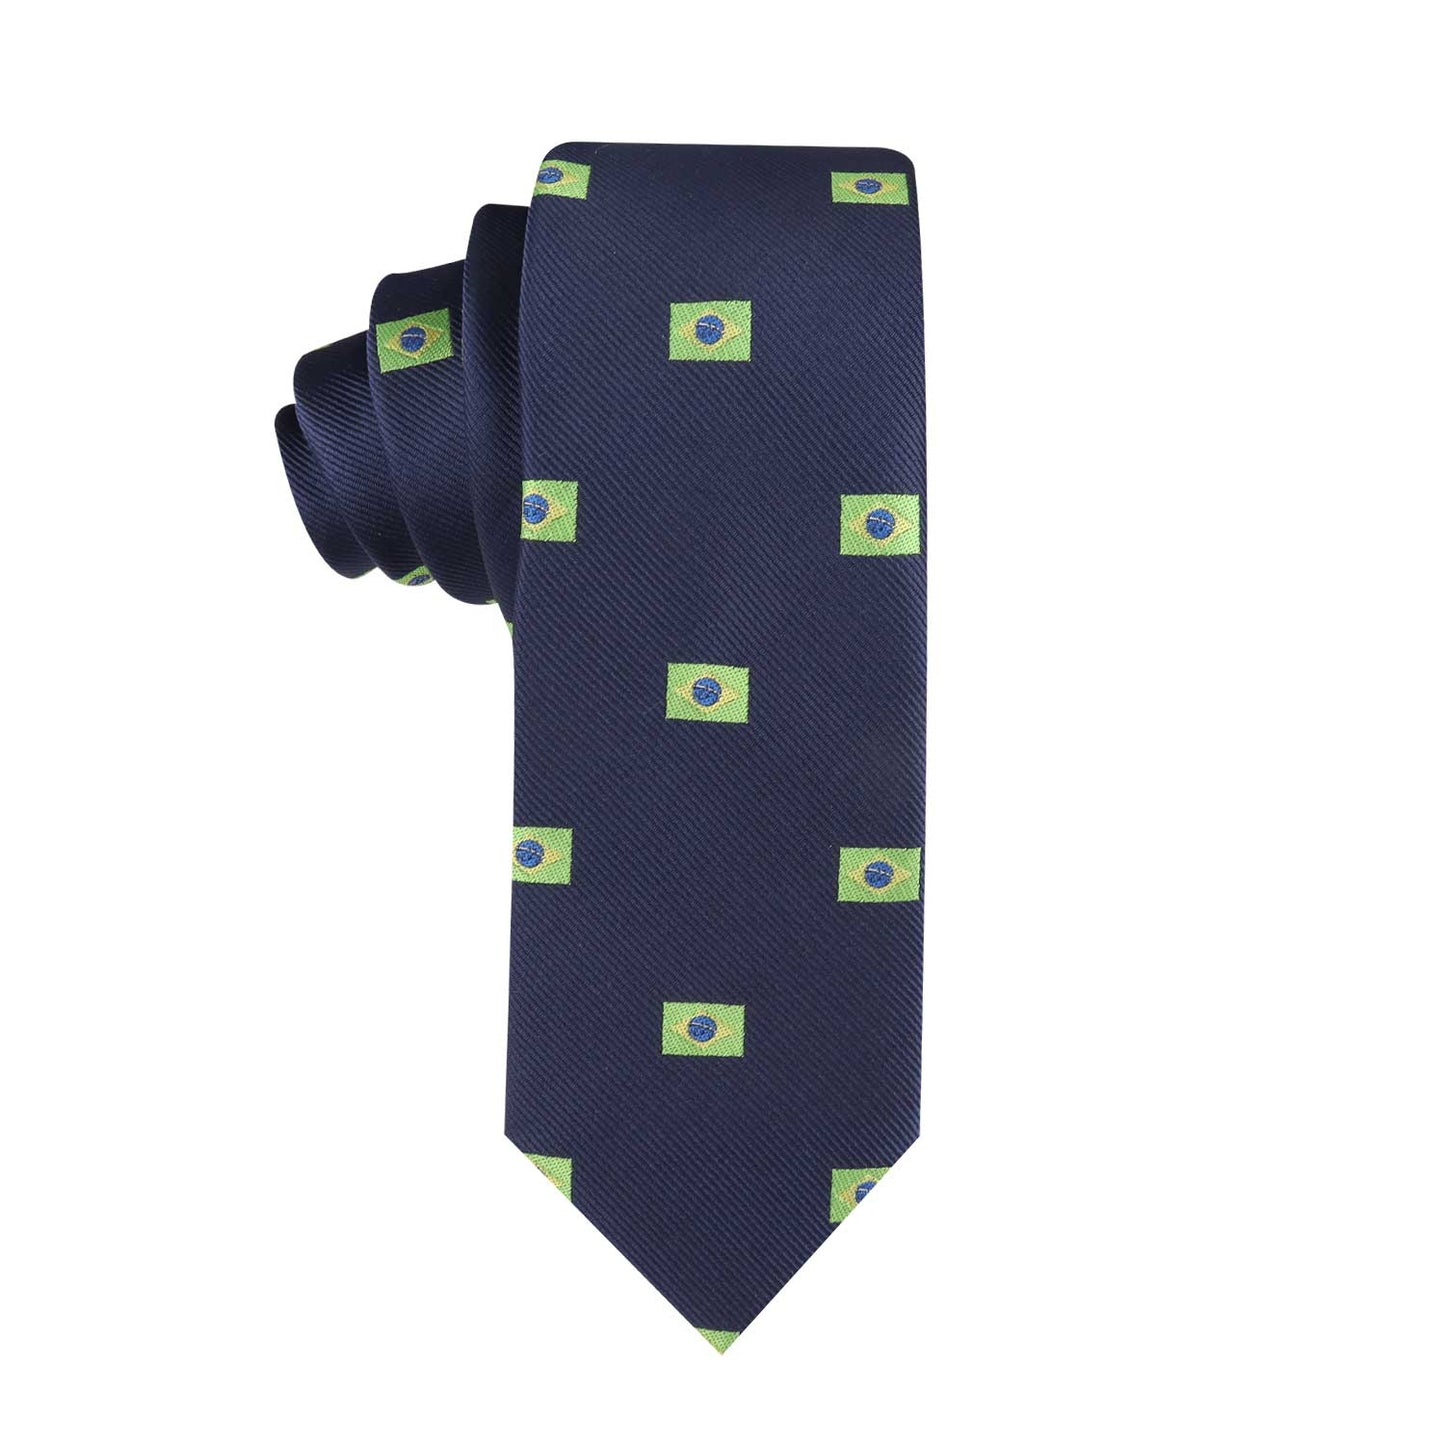 A Brazil Flag Skinny Tie with vibrant green and blue squares on it.